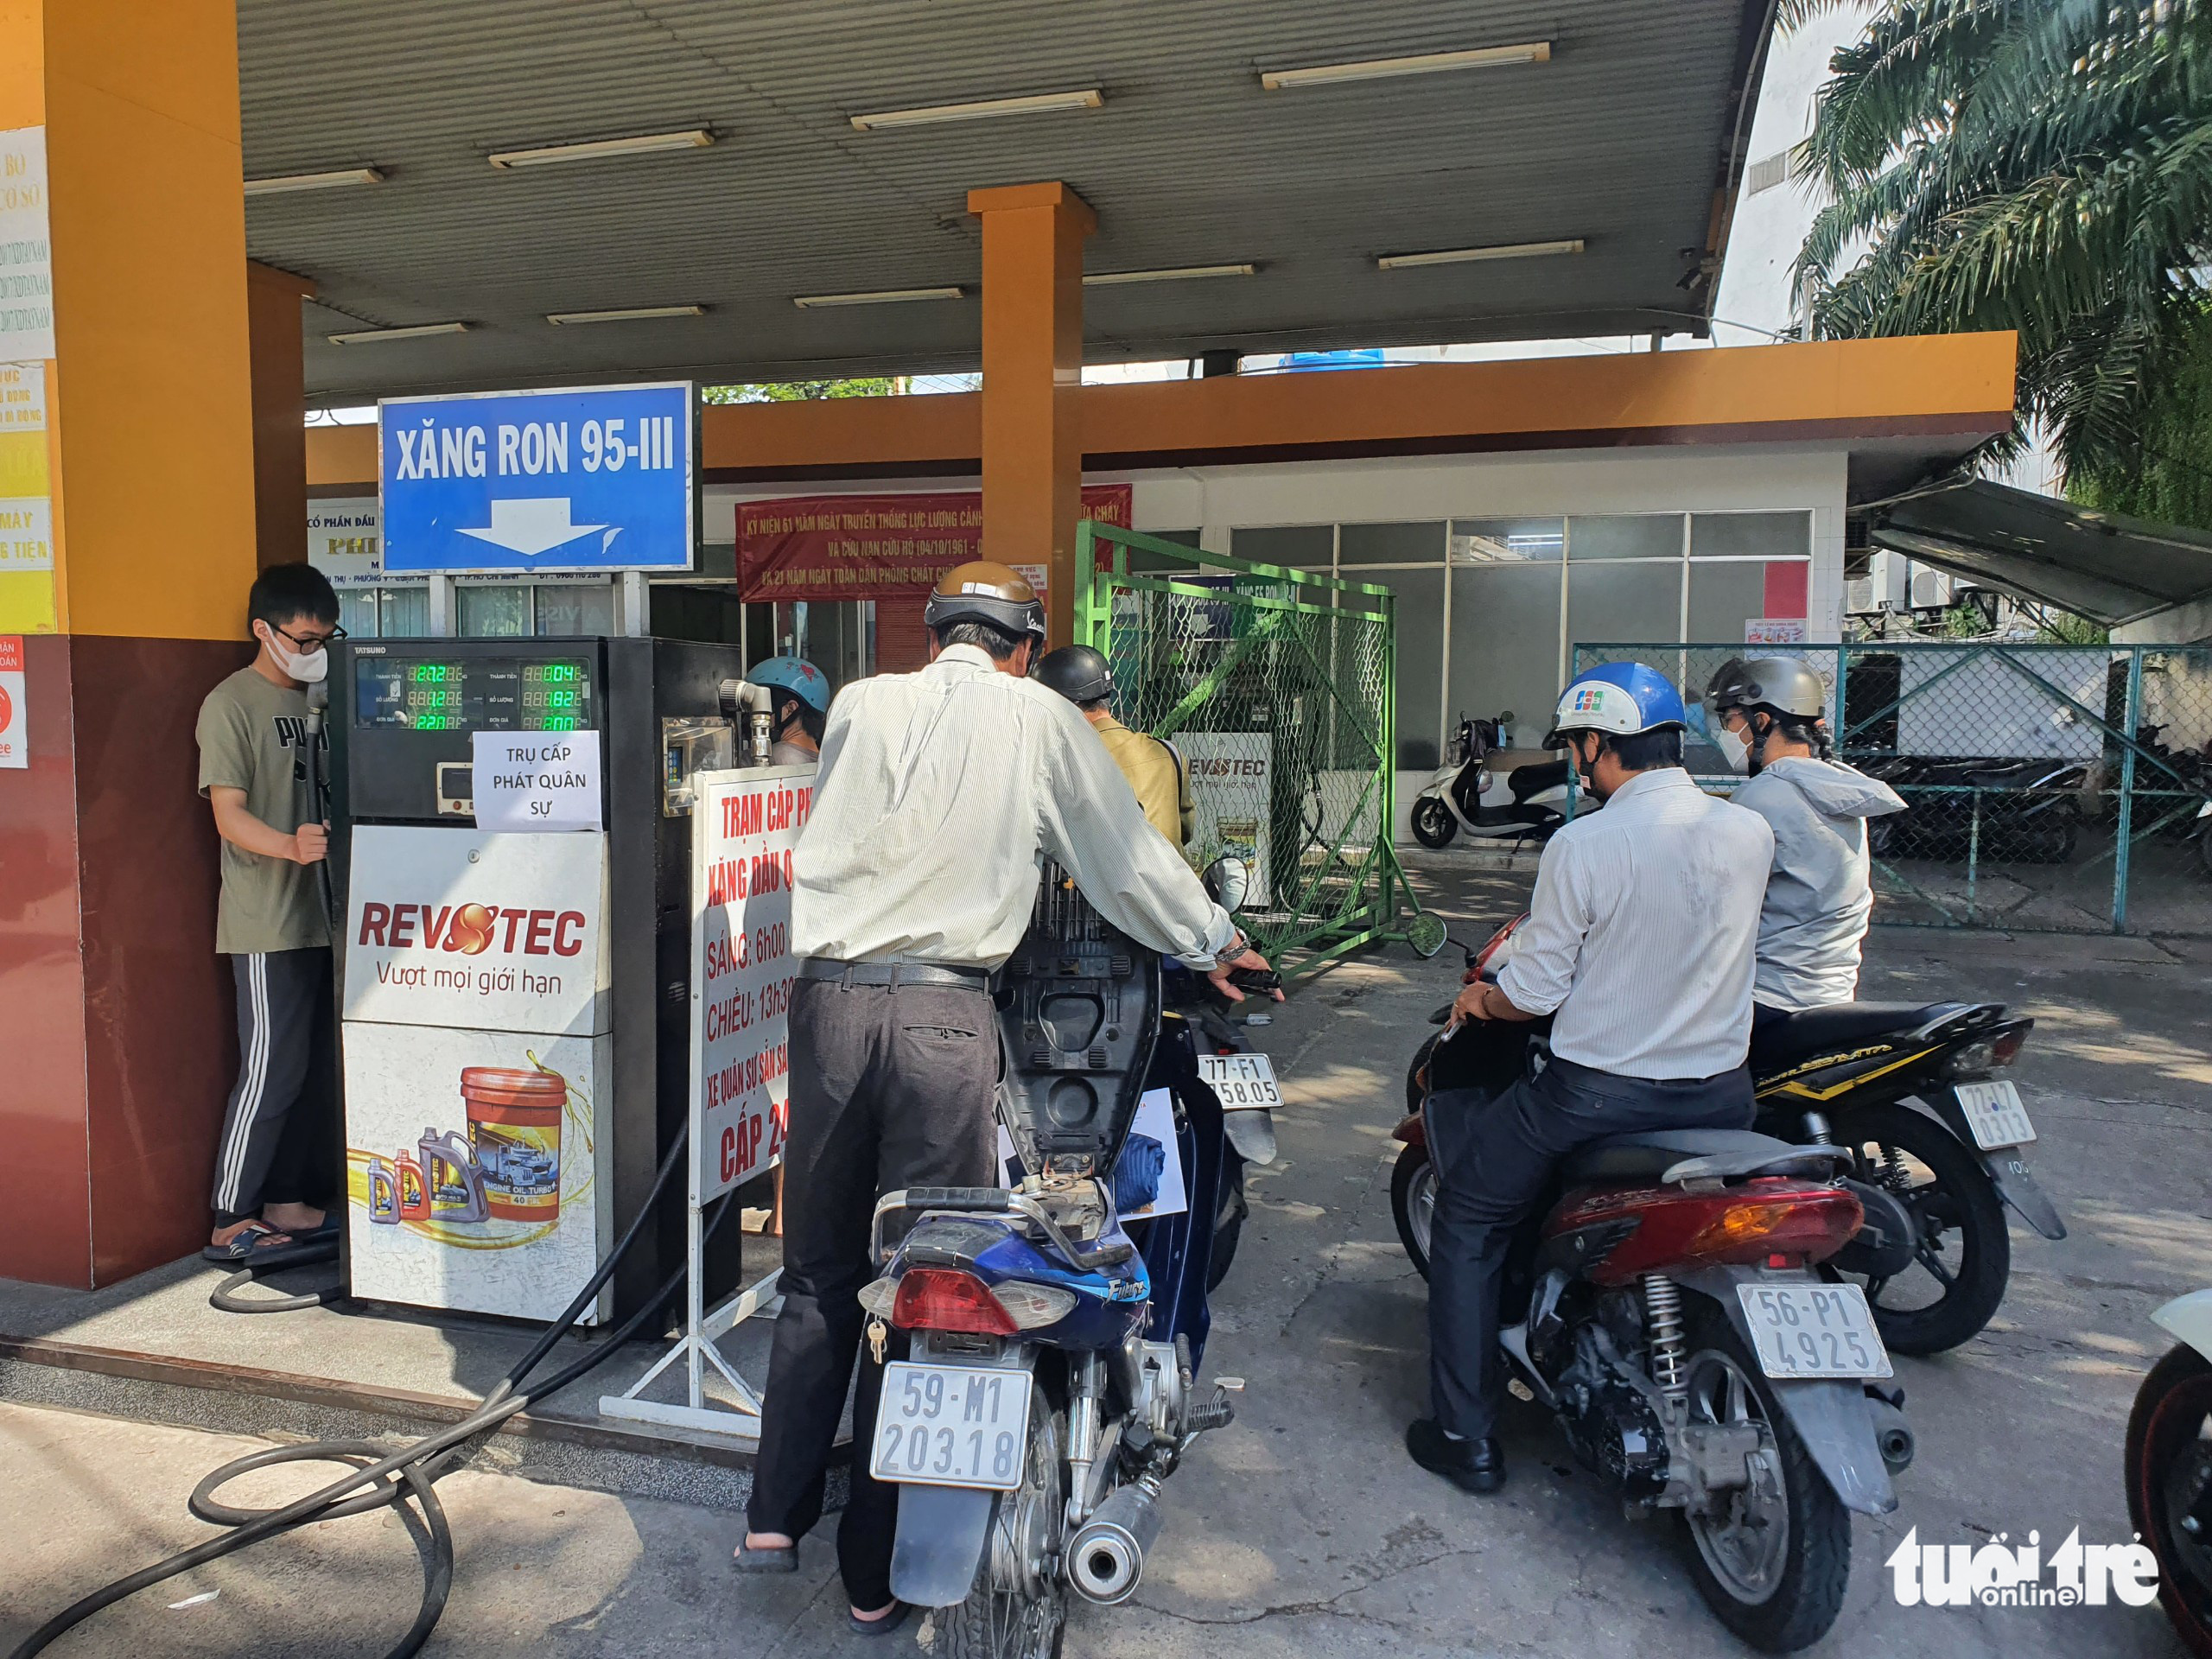 A filling station resumes only one of its three pumps on Hoang Van Thu Street in Phu Nhuan District, Ho Chi Minh City, October 12, 2022. Photo: Cong Trung / Tuoi Tre